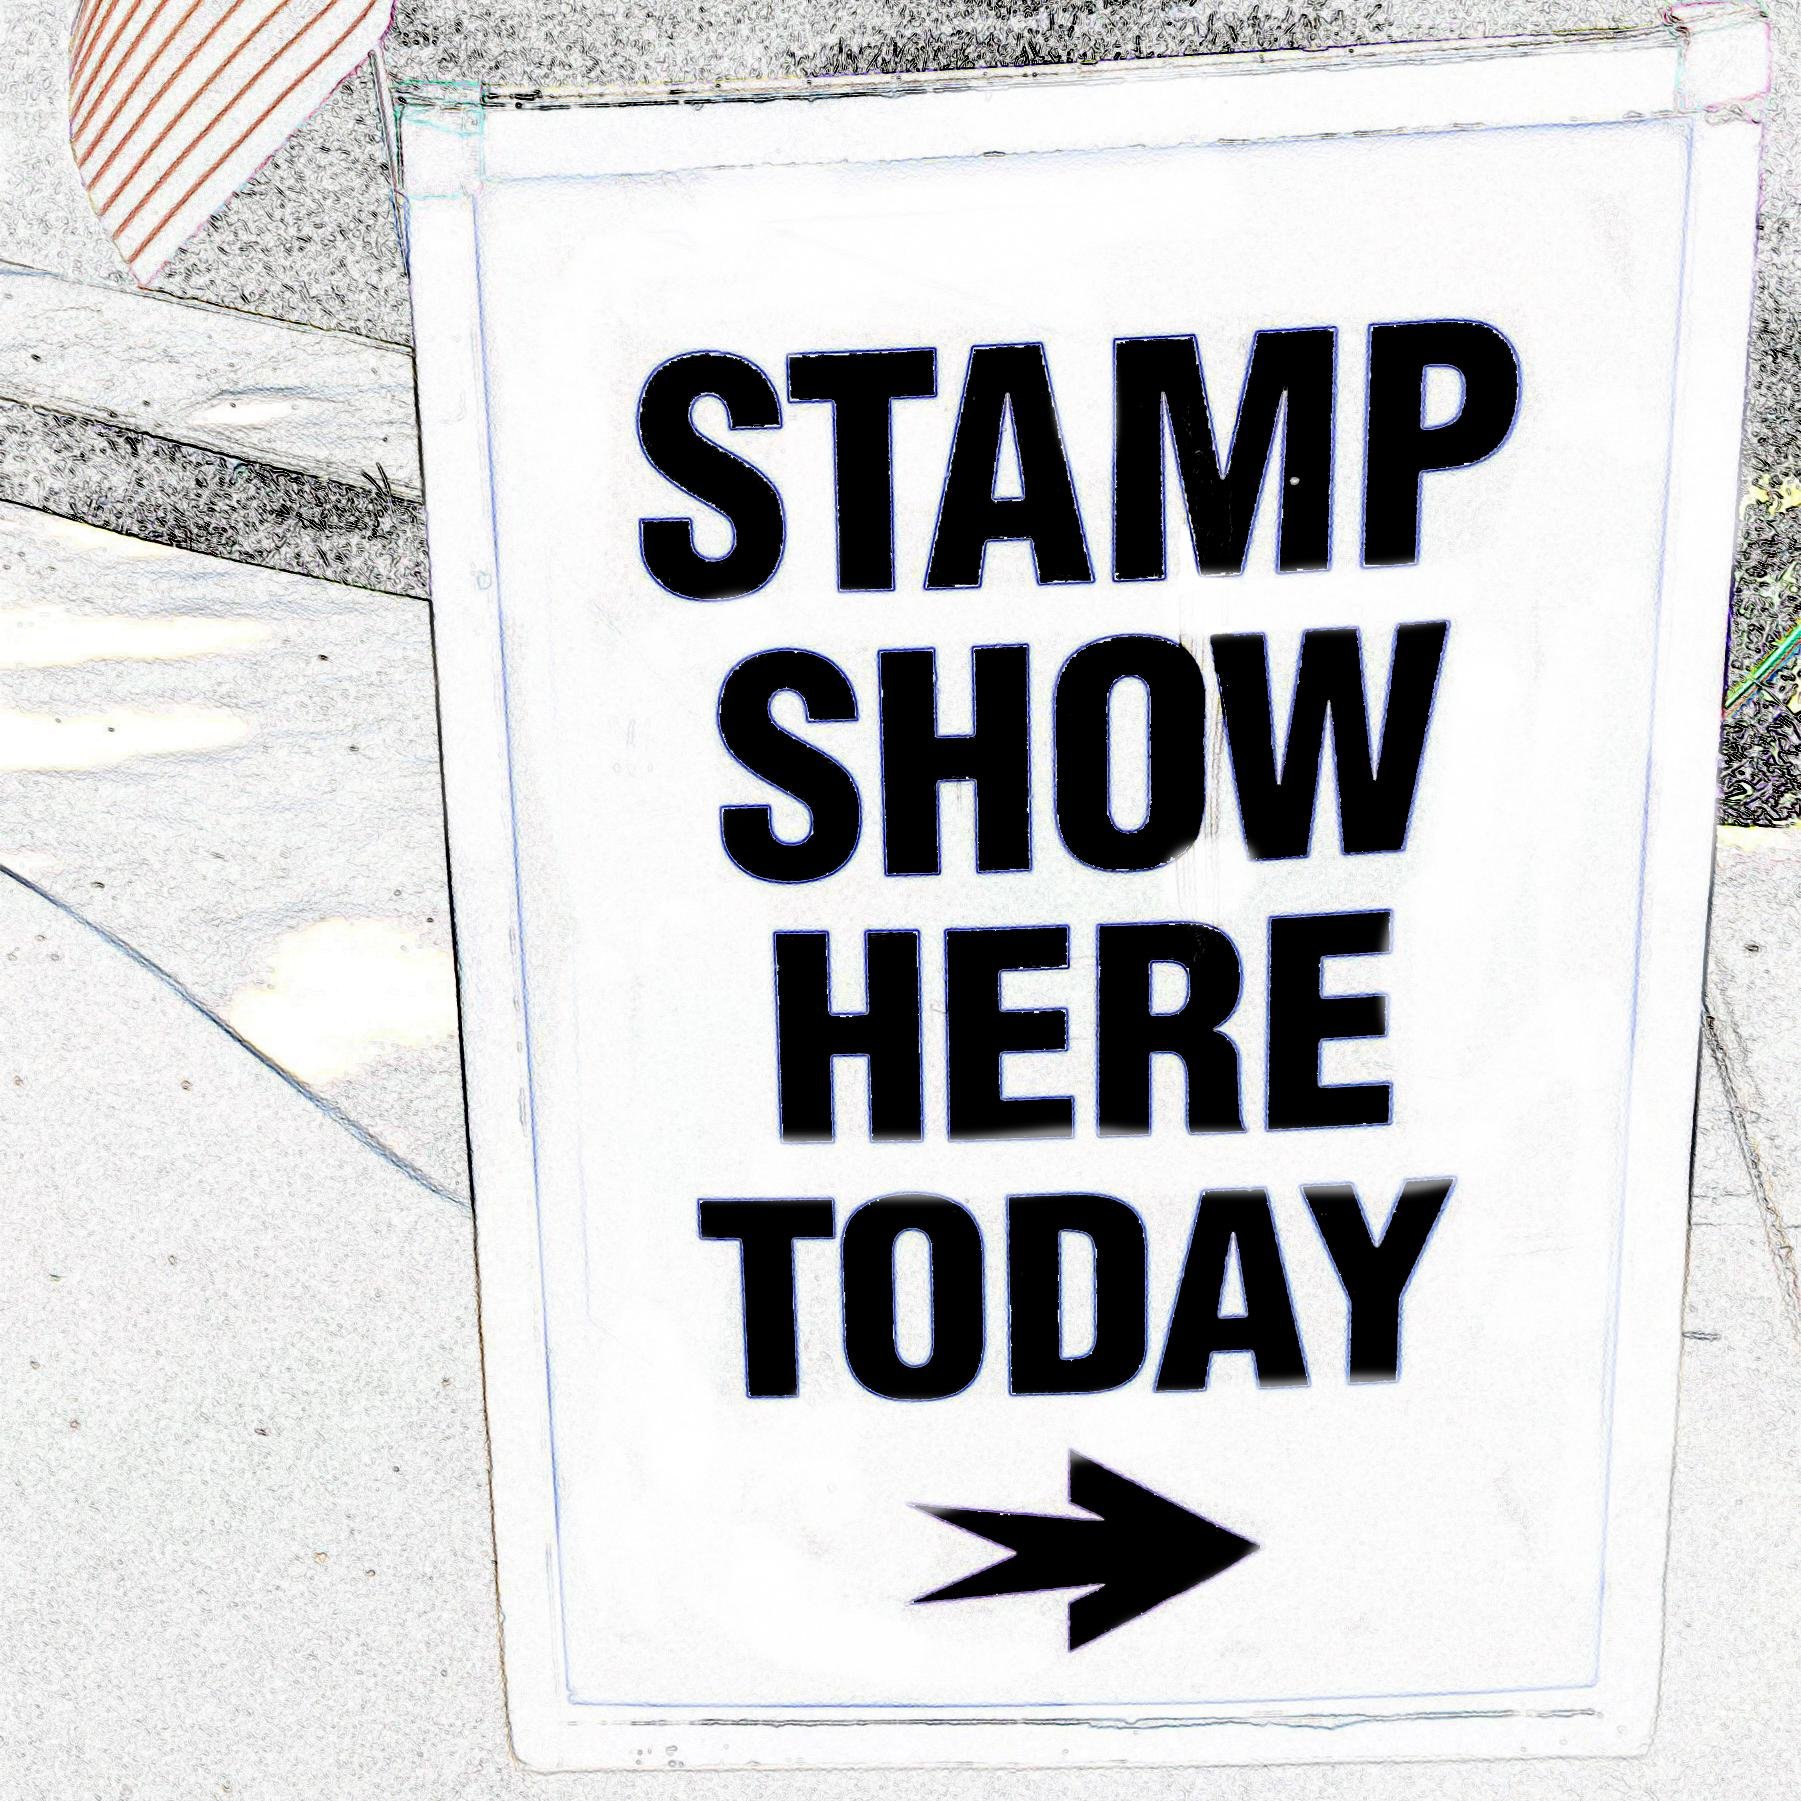 Stamp Show Here Today the Stamp Collecting Podcast, the stamp show you can take home. Follow for stamp news & history!